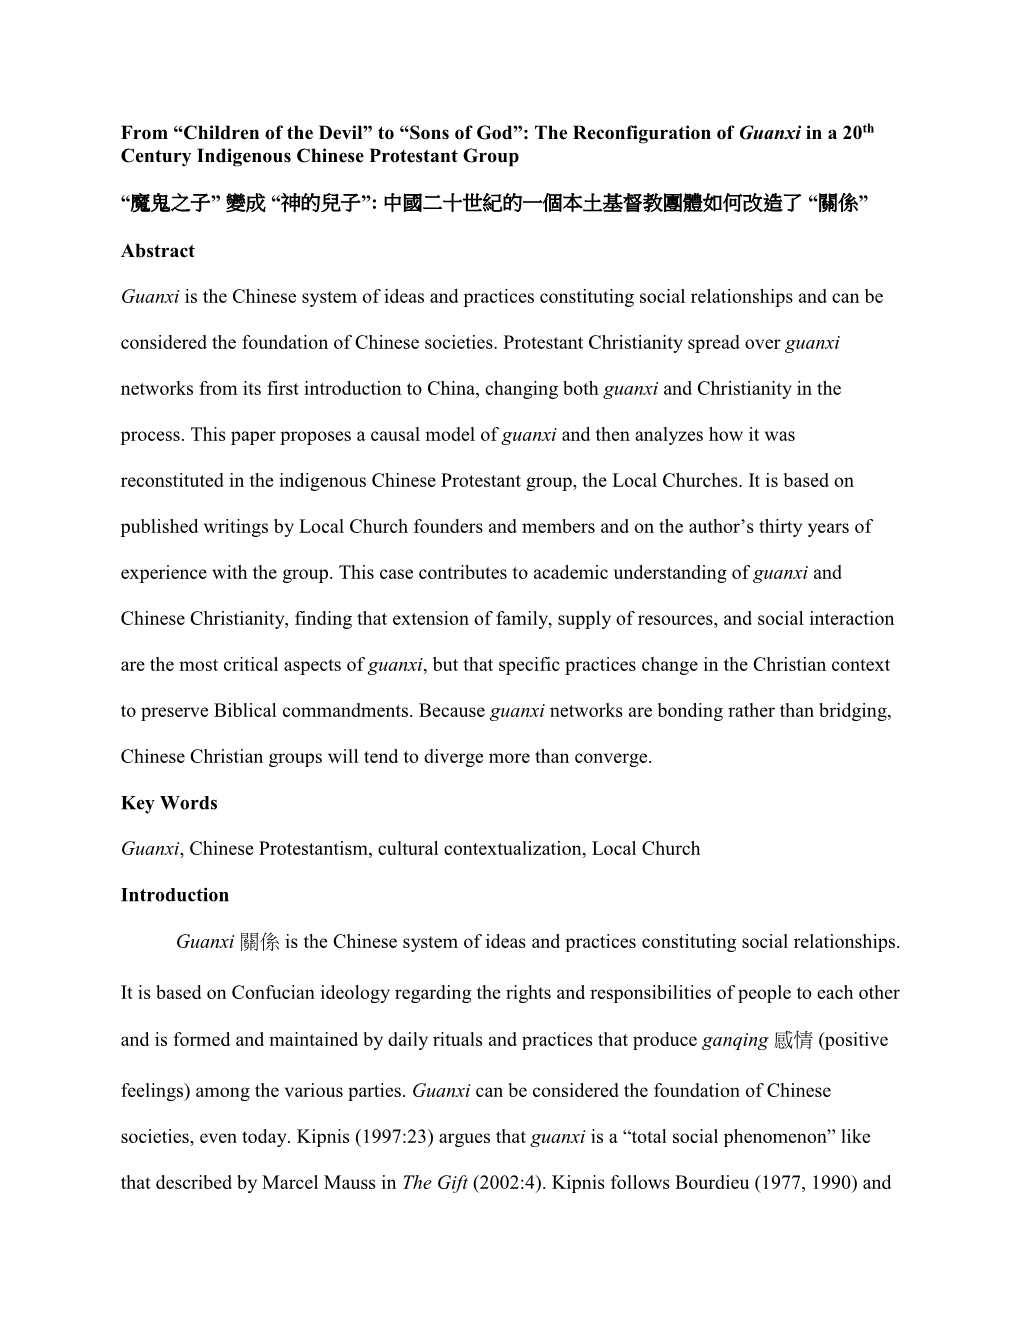 “Children of the Devil” to “Sons of God”: the Reconfiguration of Guanxi in a 20Th Century Indigenous Chinese Protestant Group